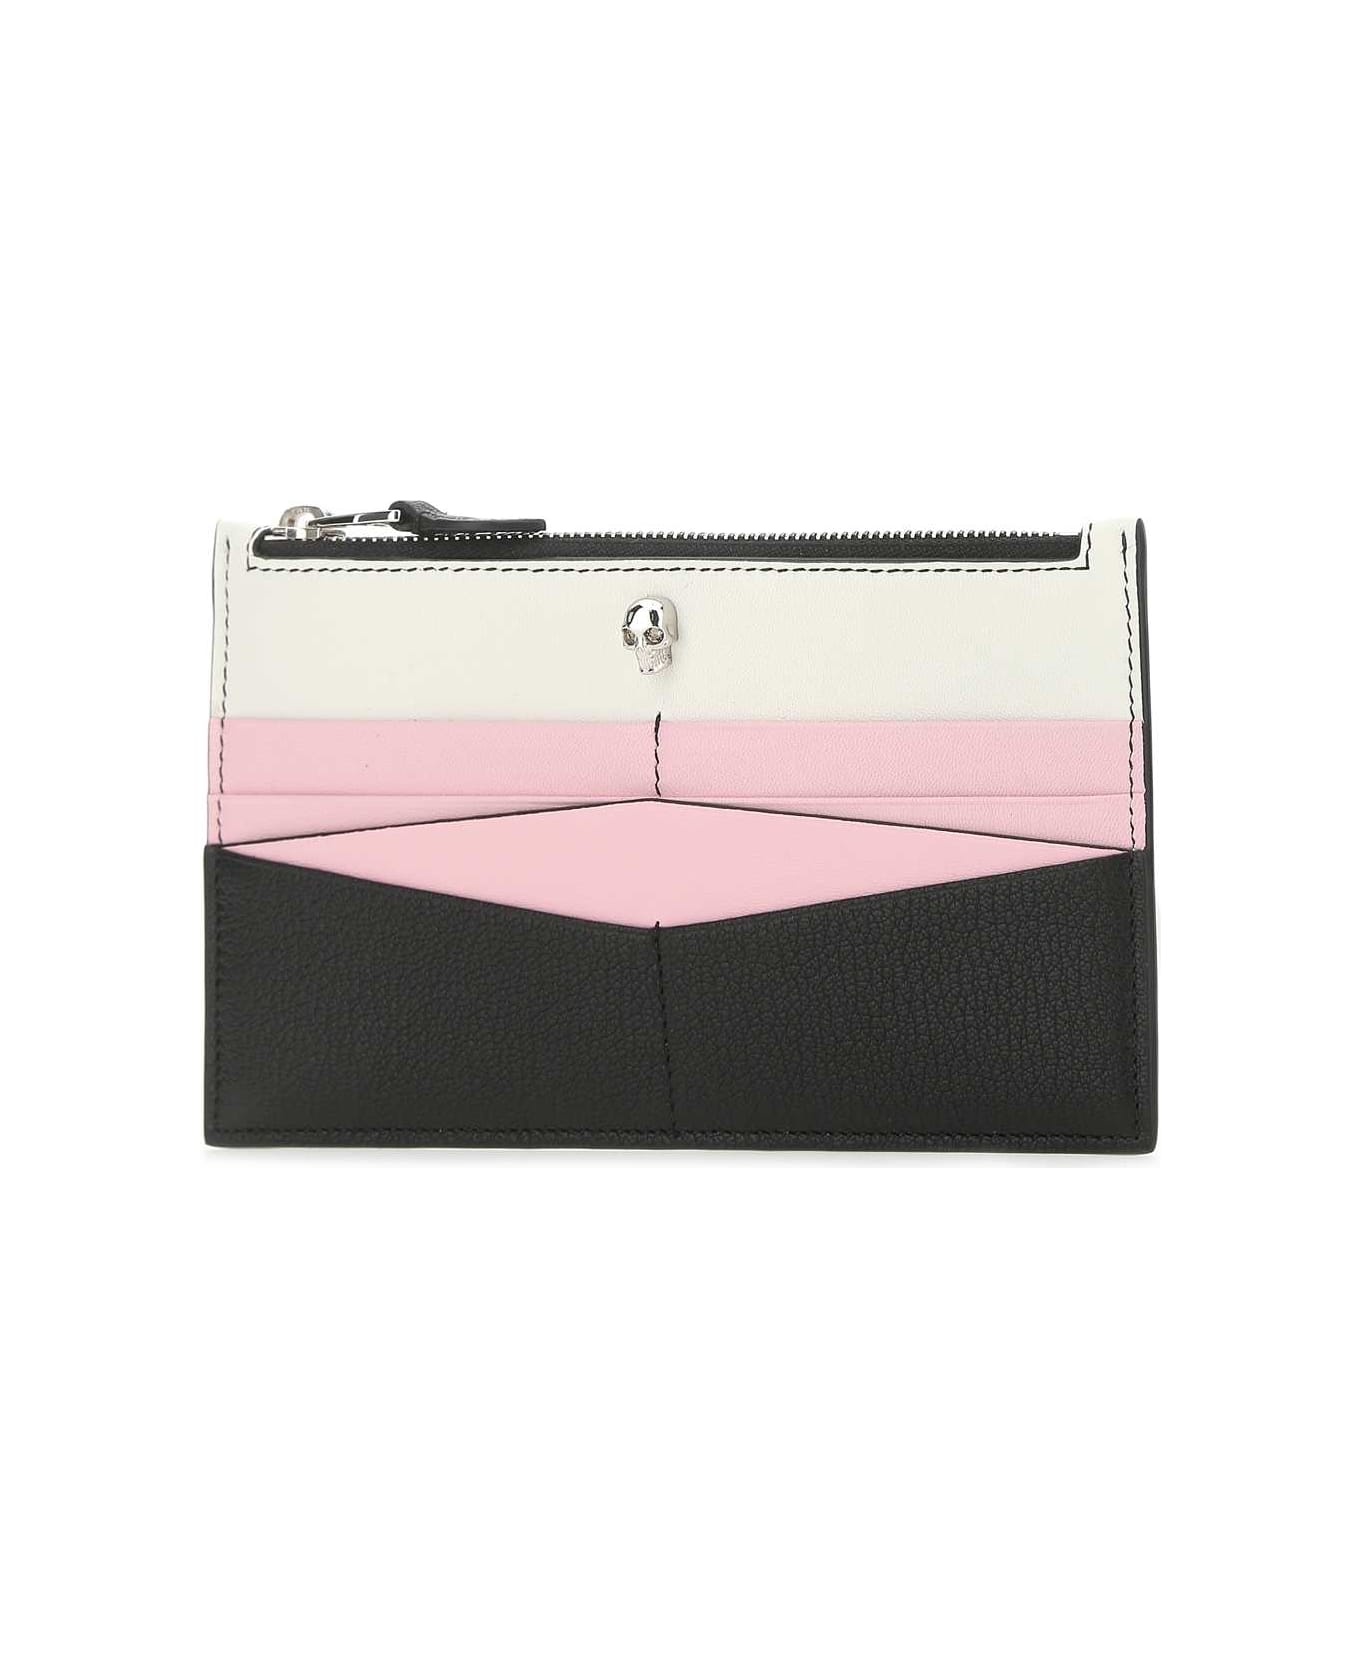 Alexander McQueen Multicolor Leather Pouch - 8490 クラッチバッグ